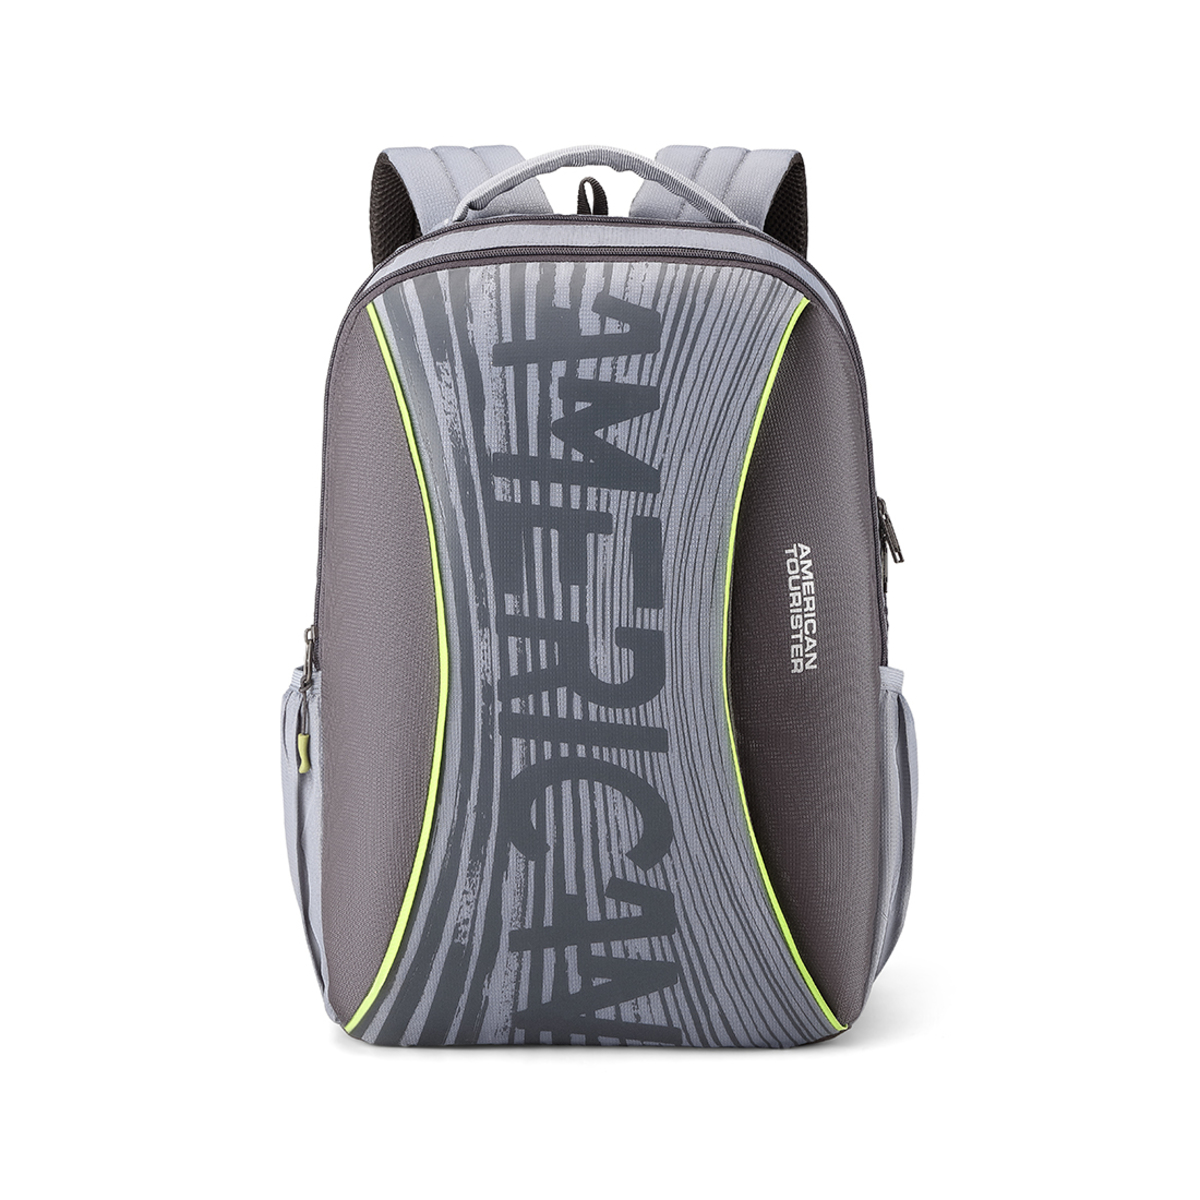 American Tourister Back Pack Twing 02 Grey